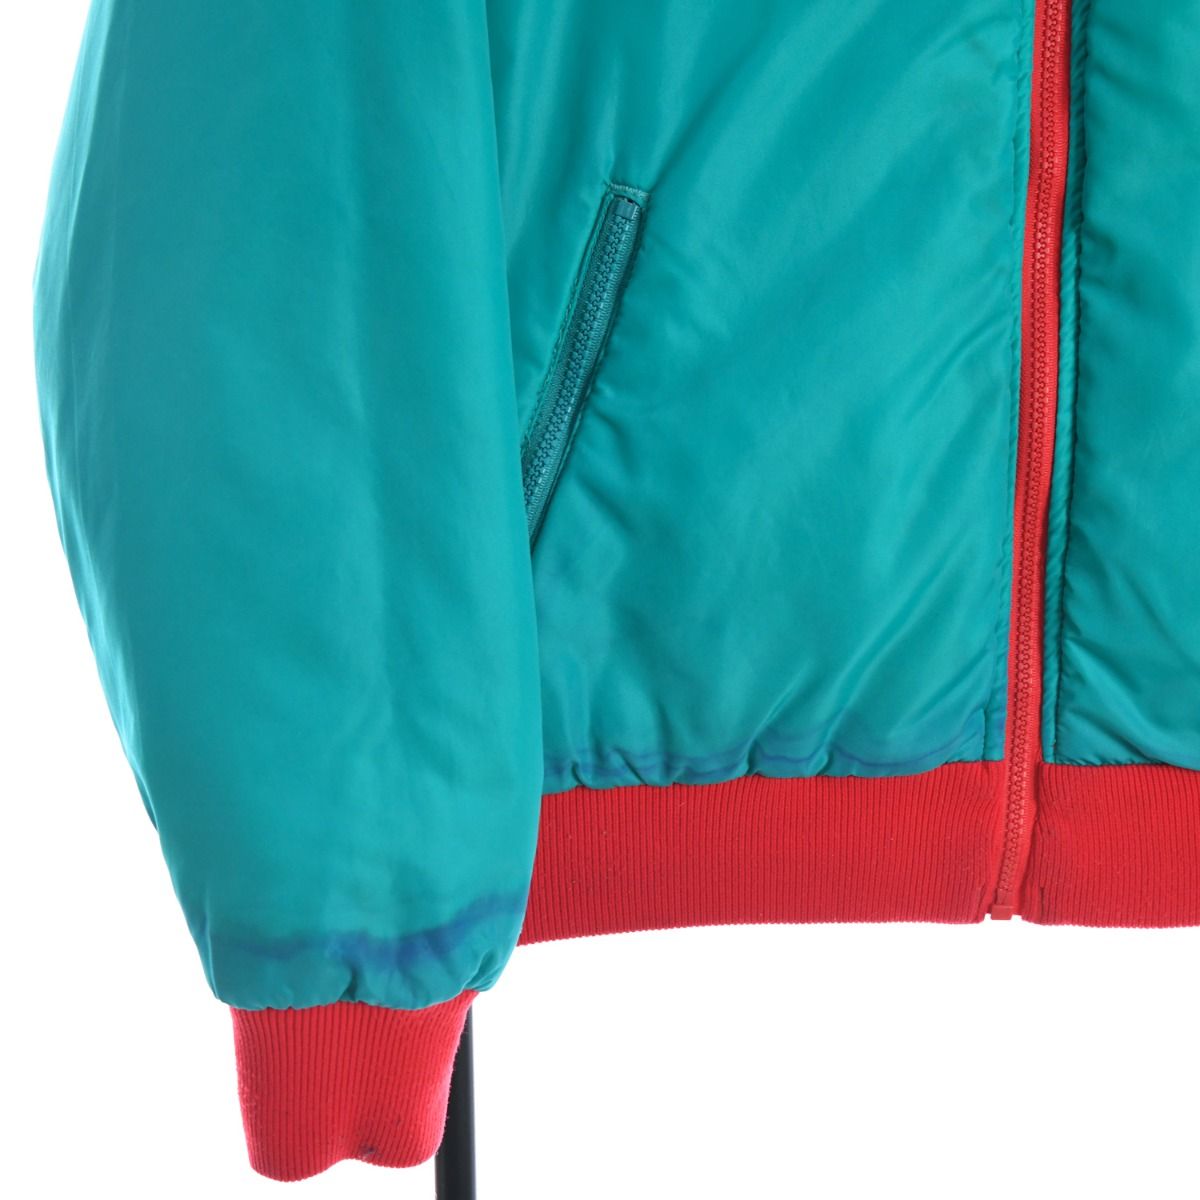 Columbia 1990s Reversible Red Color Padded Jacket